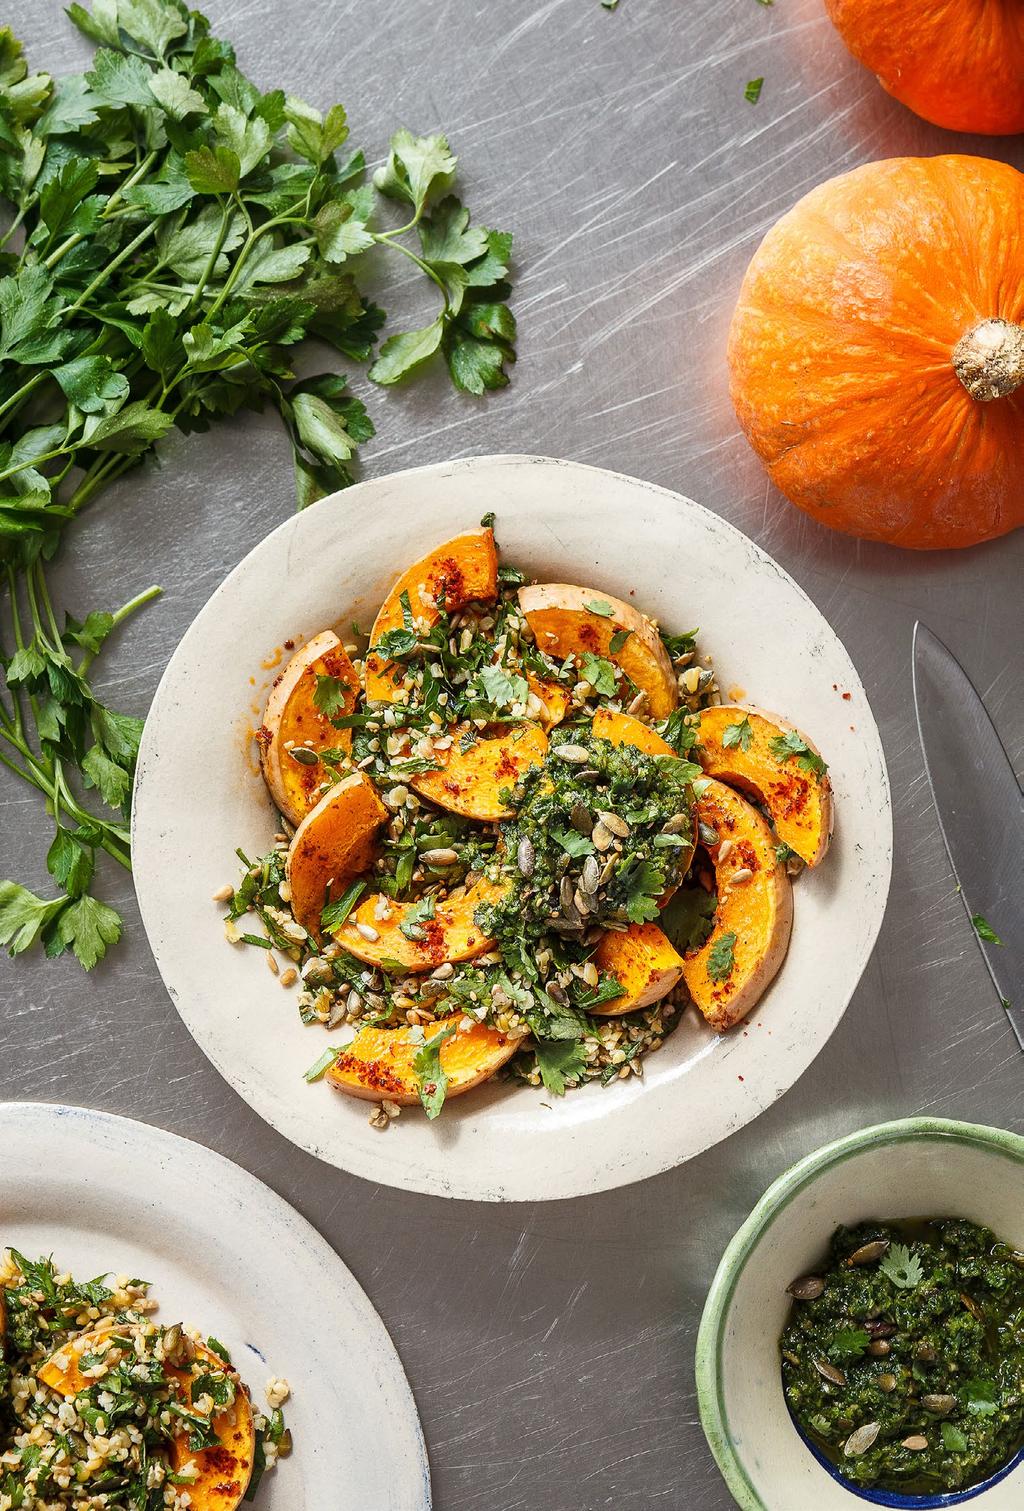 Roasted squash with herby seedy freekeh and zhoug Hot spicy Yemeni zhoug is a lovely addition to one of my favourite salads of roasted squash and very herby seedy freekeh.